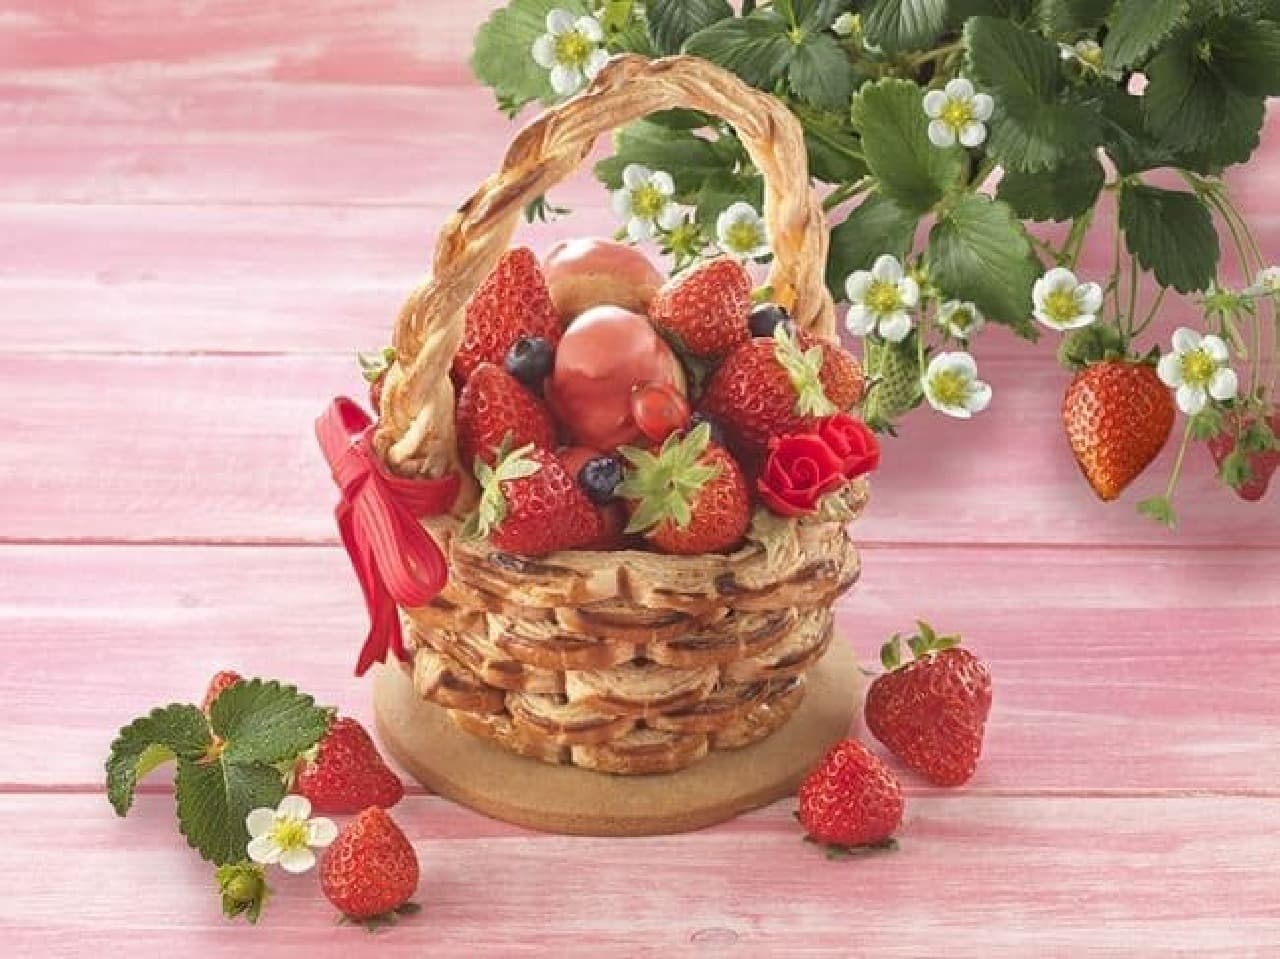 You can also eat the basket part!